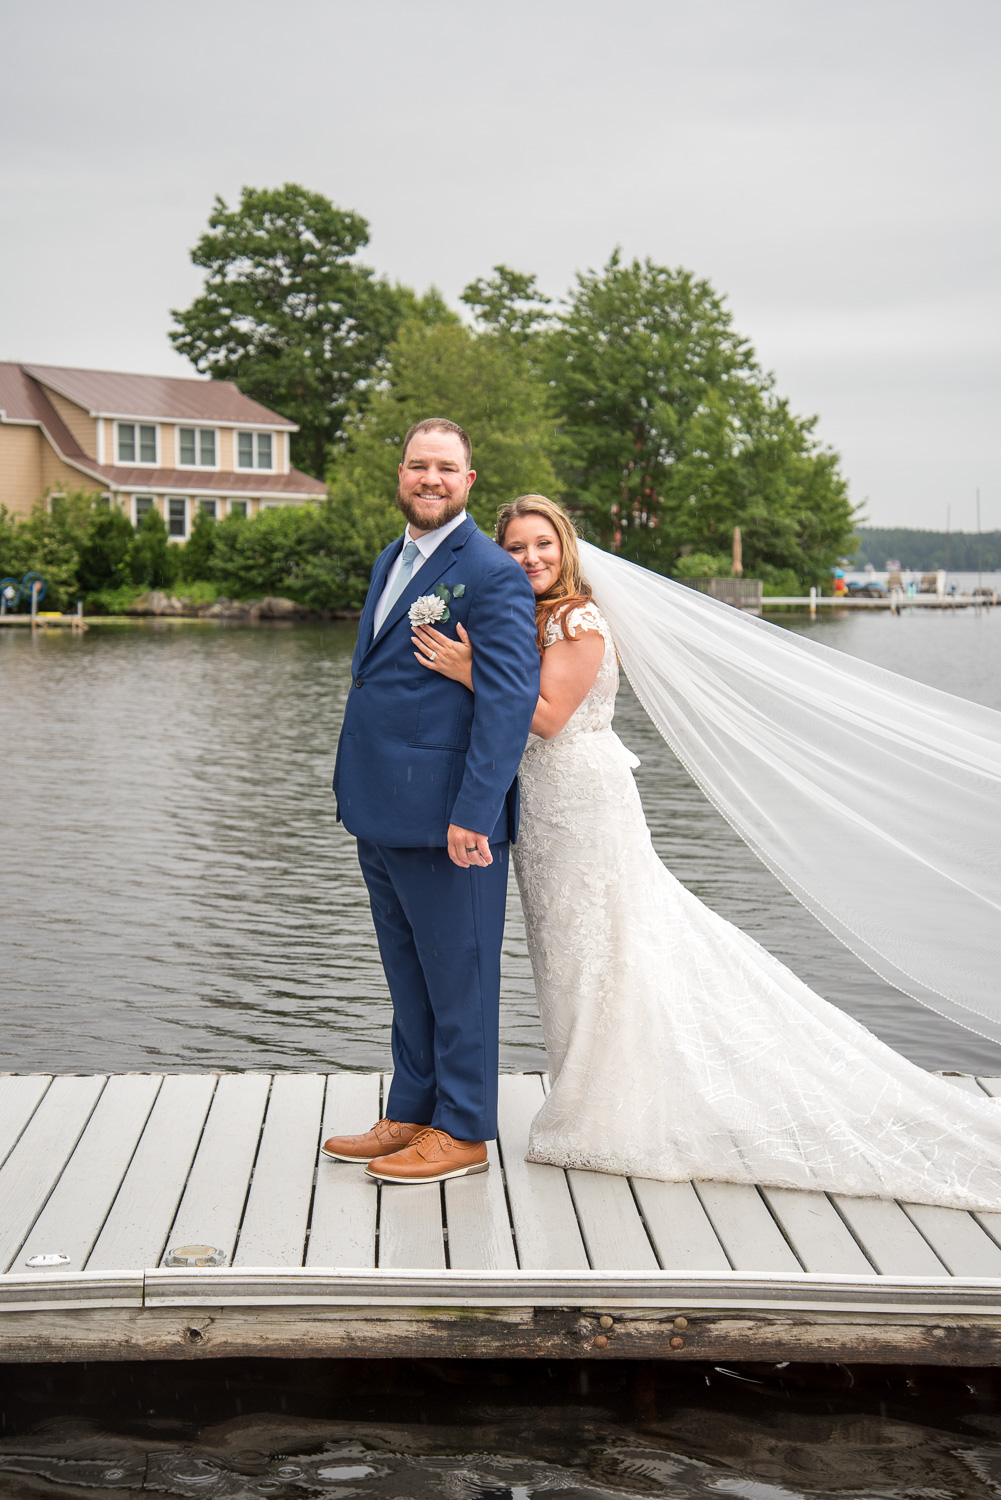 The bride and groom on the dock with the lake behind them after the rainy lakeside wedding